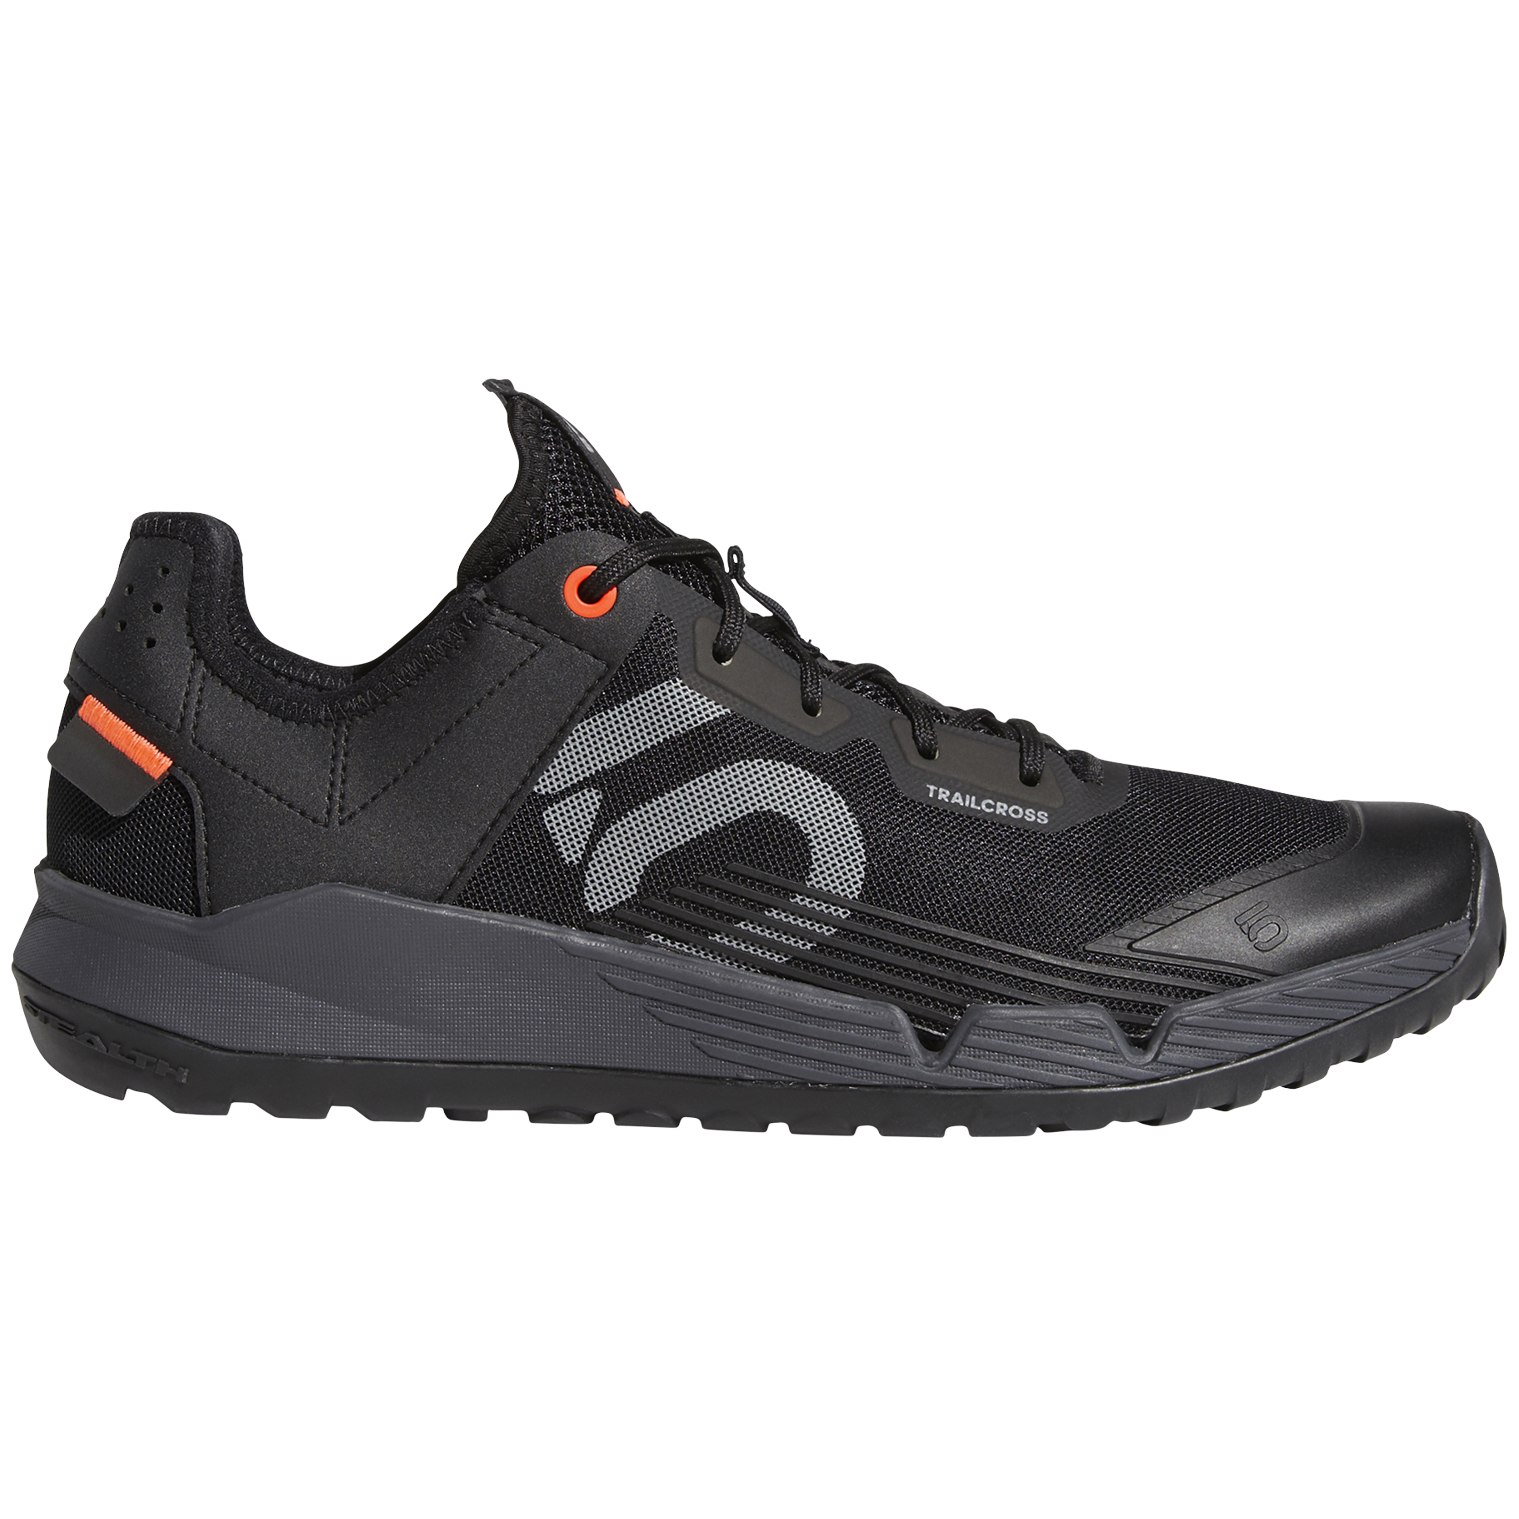 Image of Five Ten Trail Cross LT MTB Shoes - Core Black / Grey Two / Solar Red